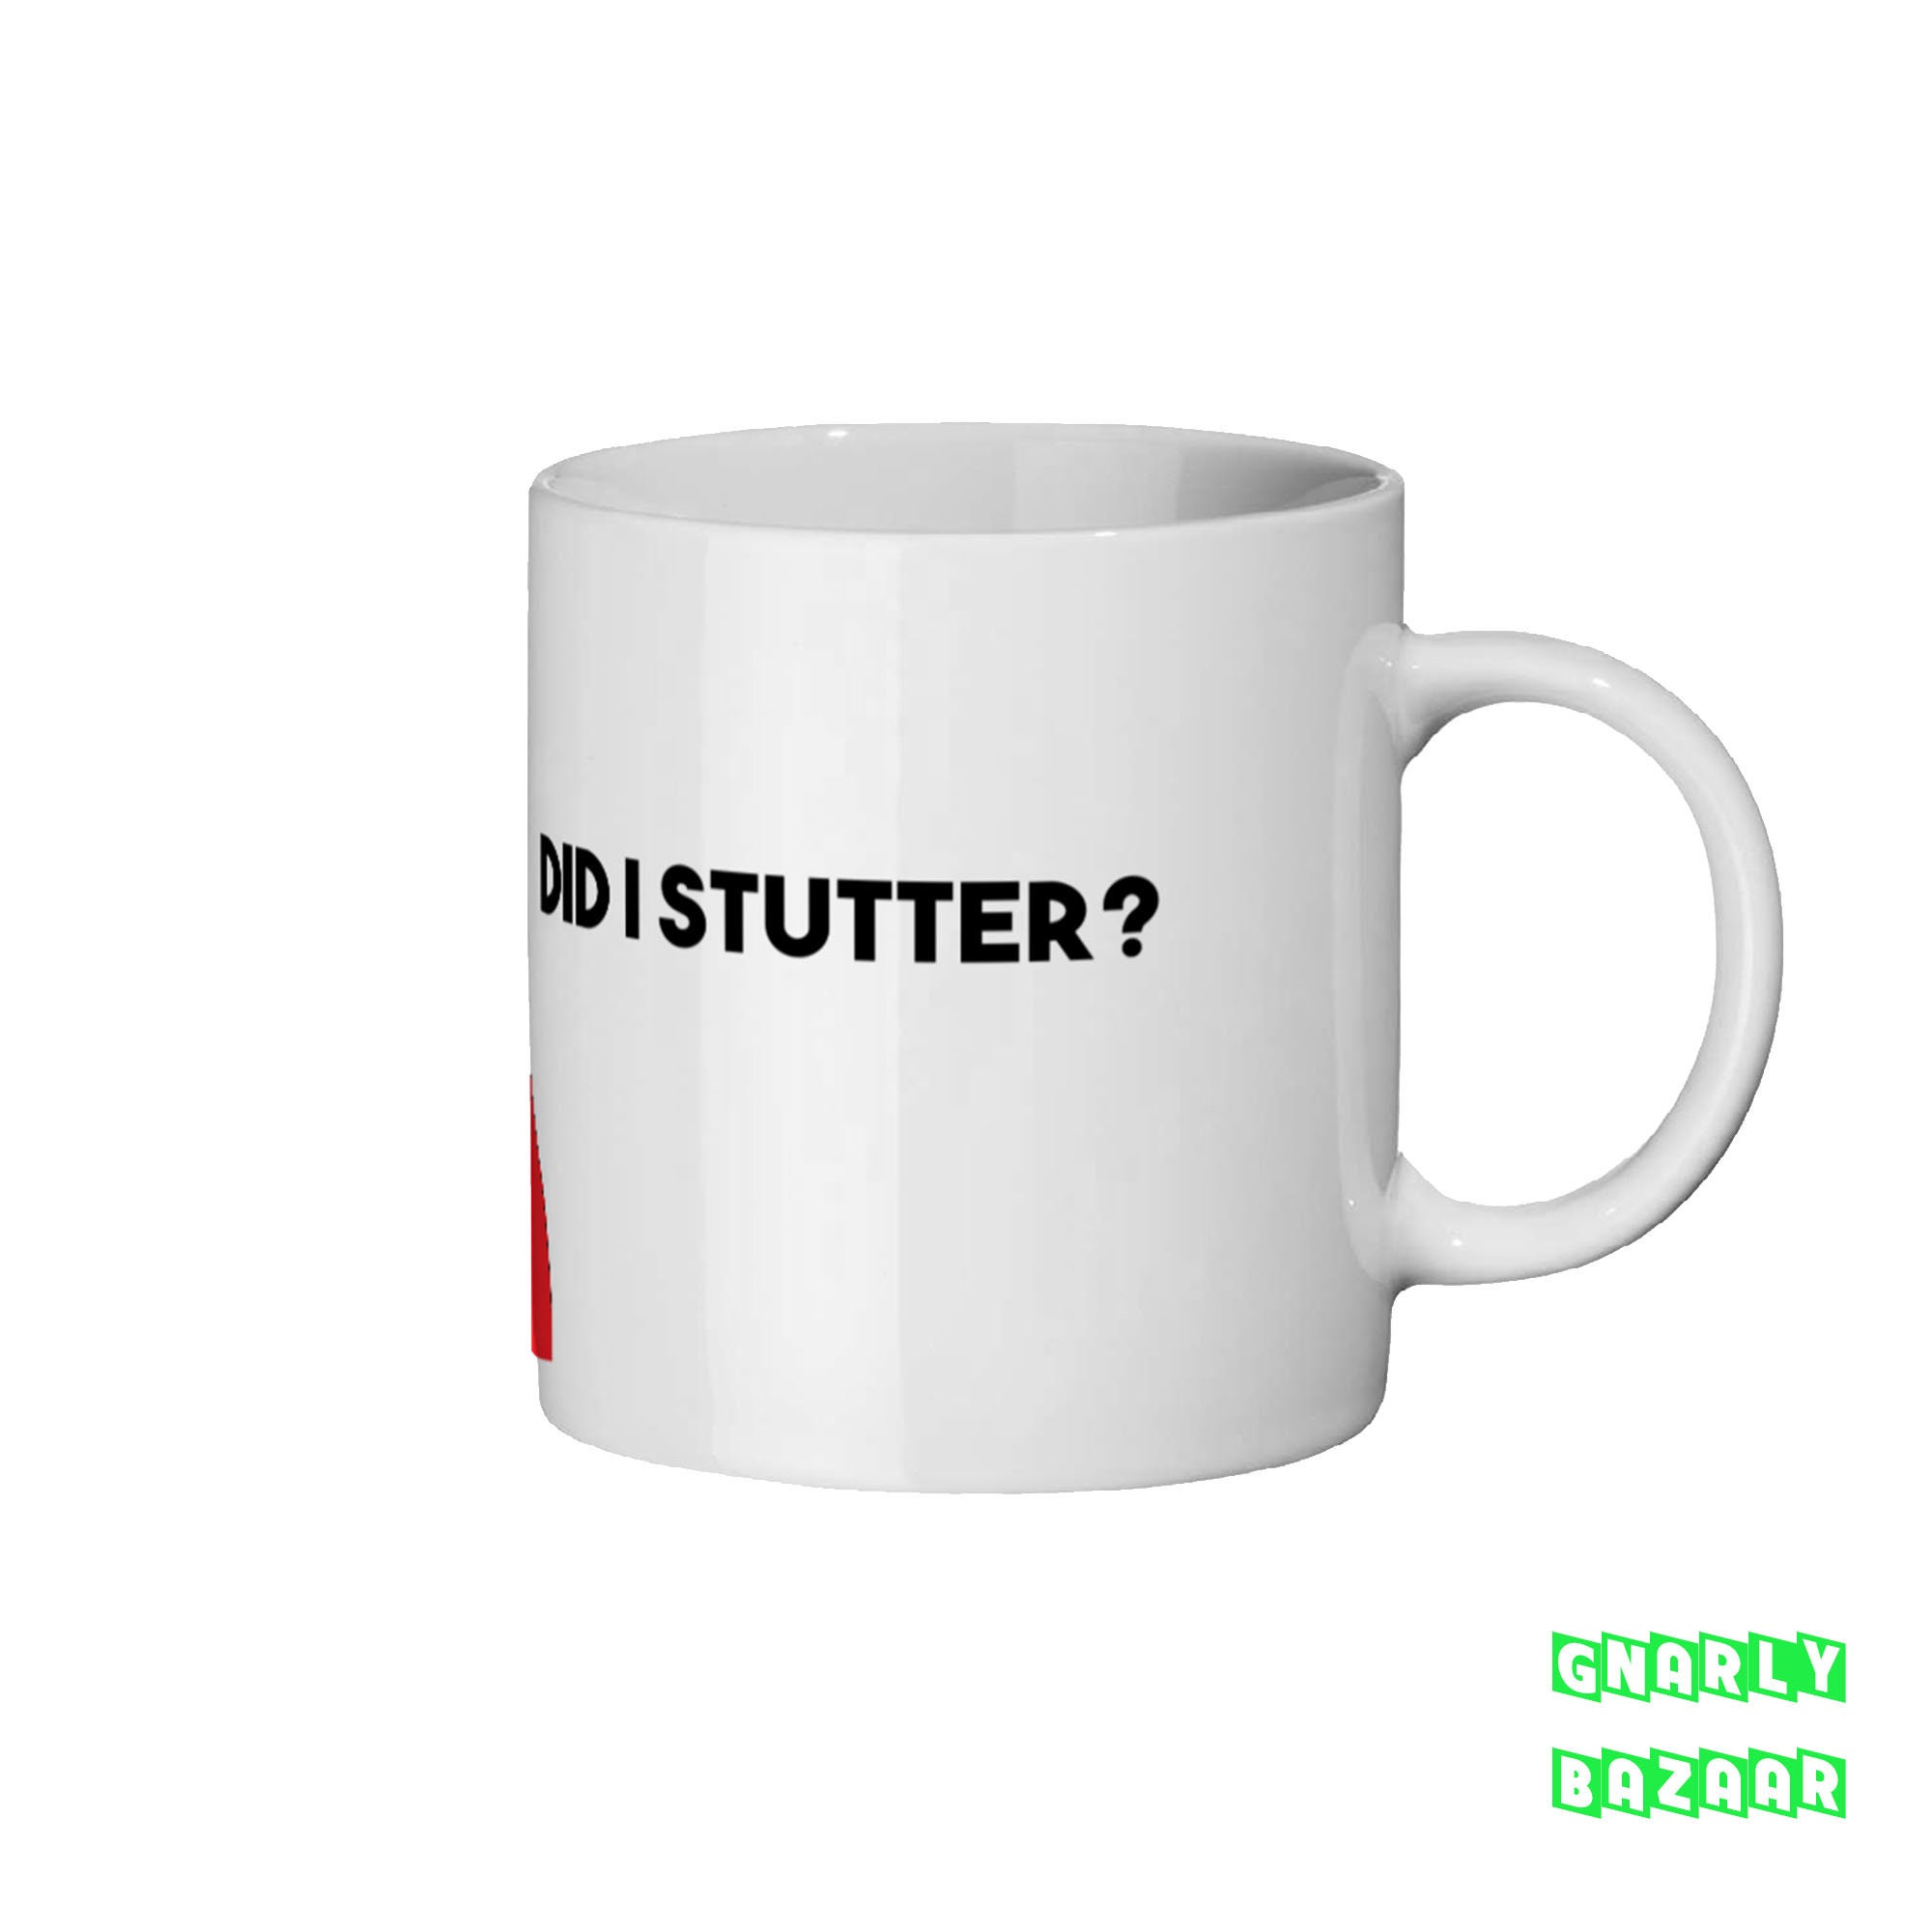 Stanley Hudson - Quote Coffee Mug for Sale by BestOfficeMemes